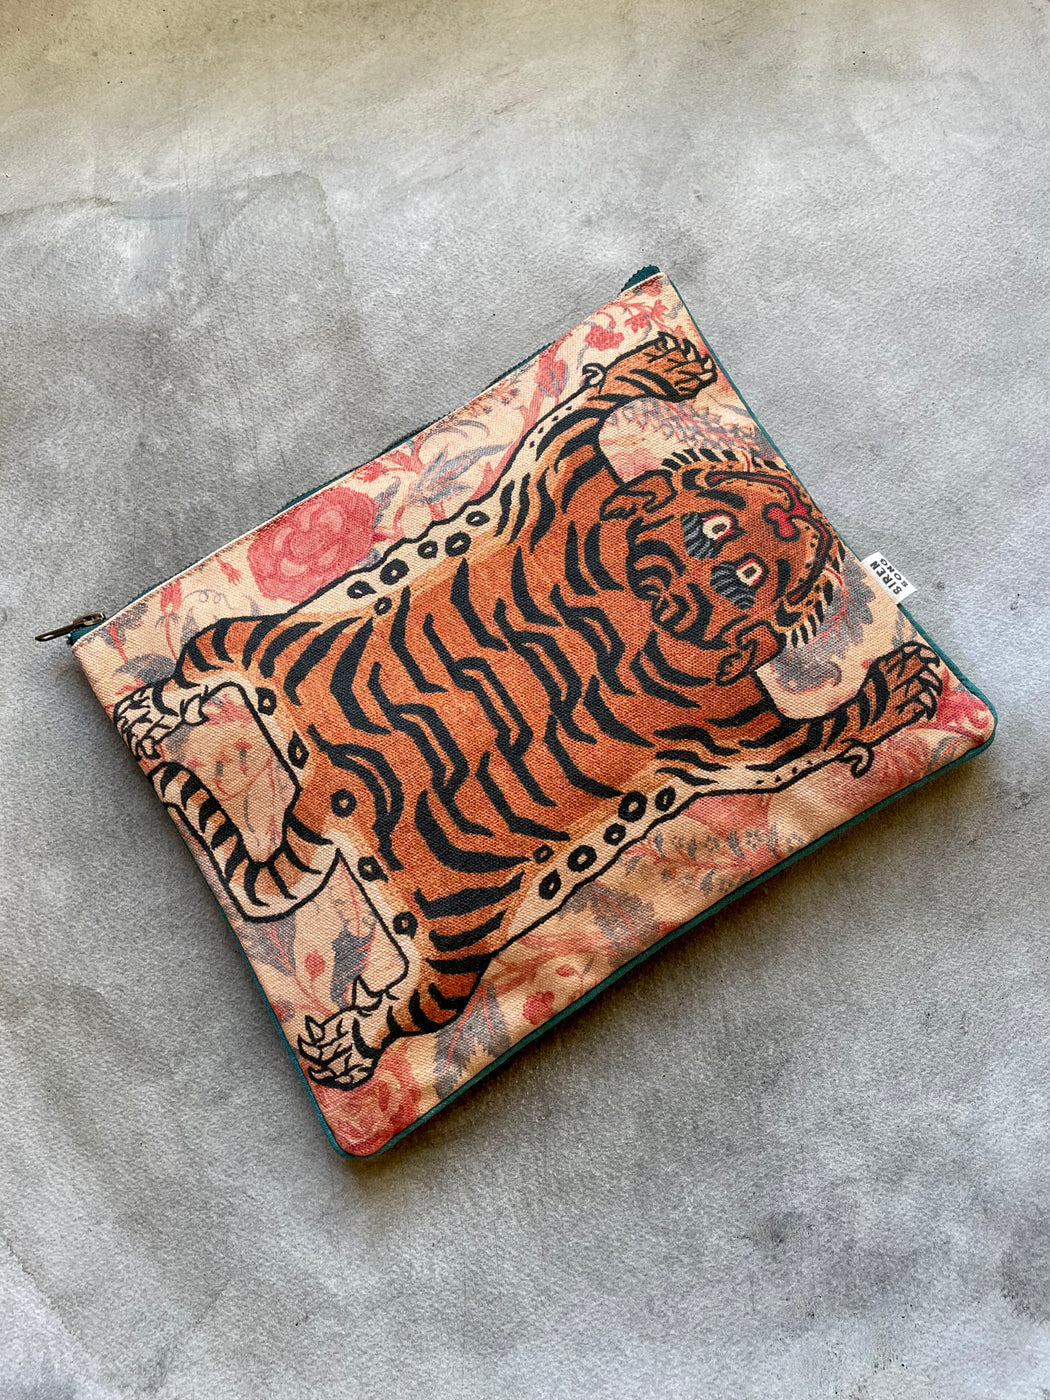 "Tiger" Pouch by Siren Song